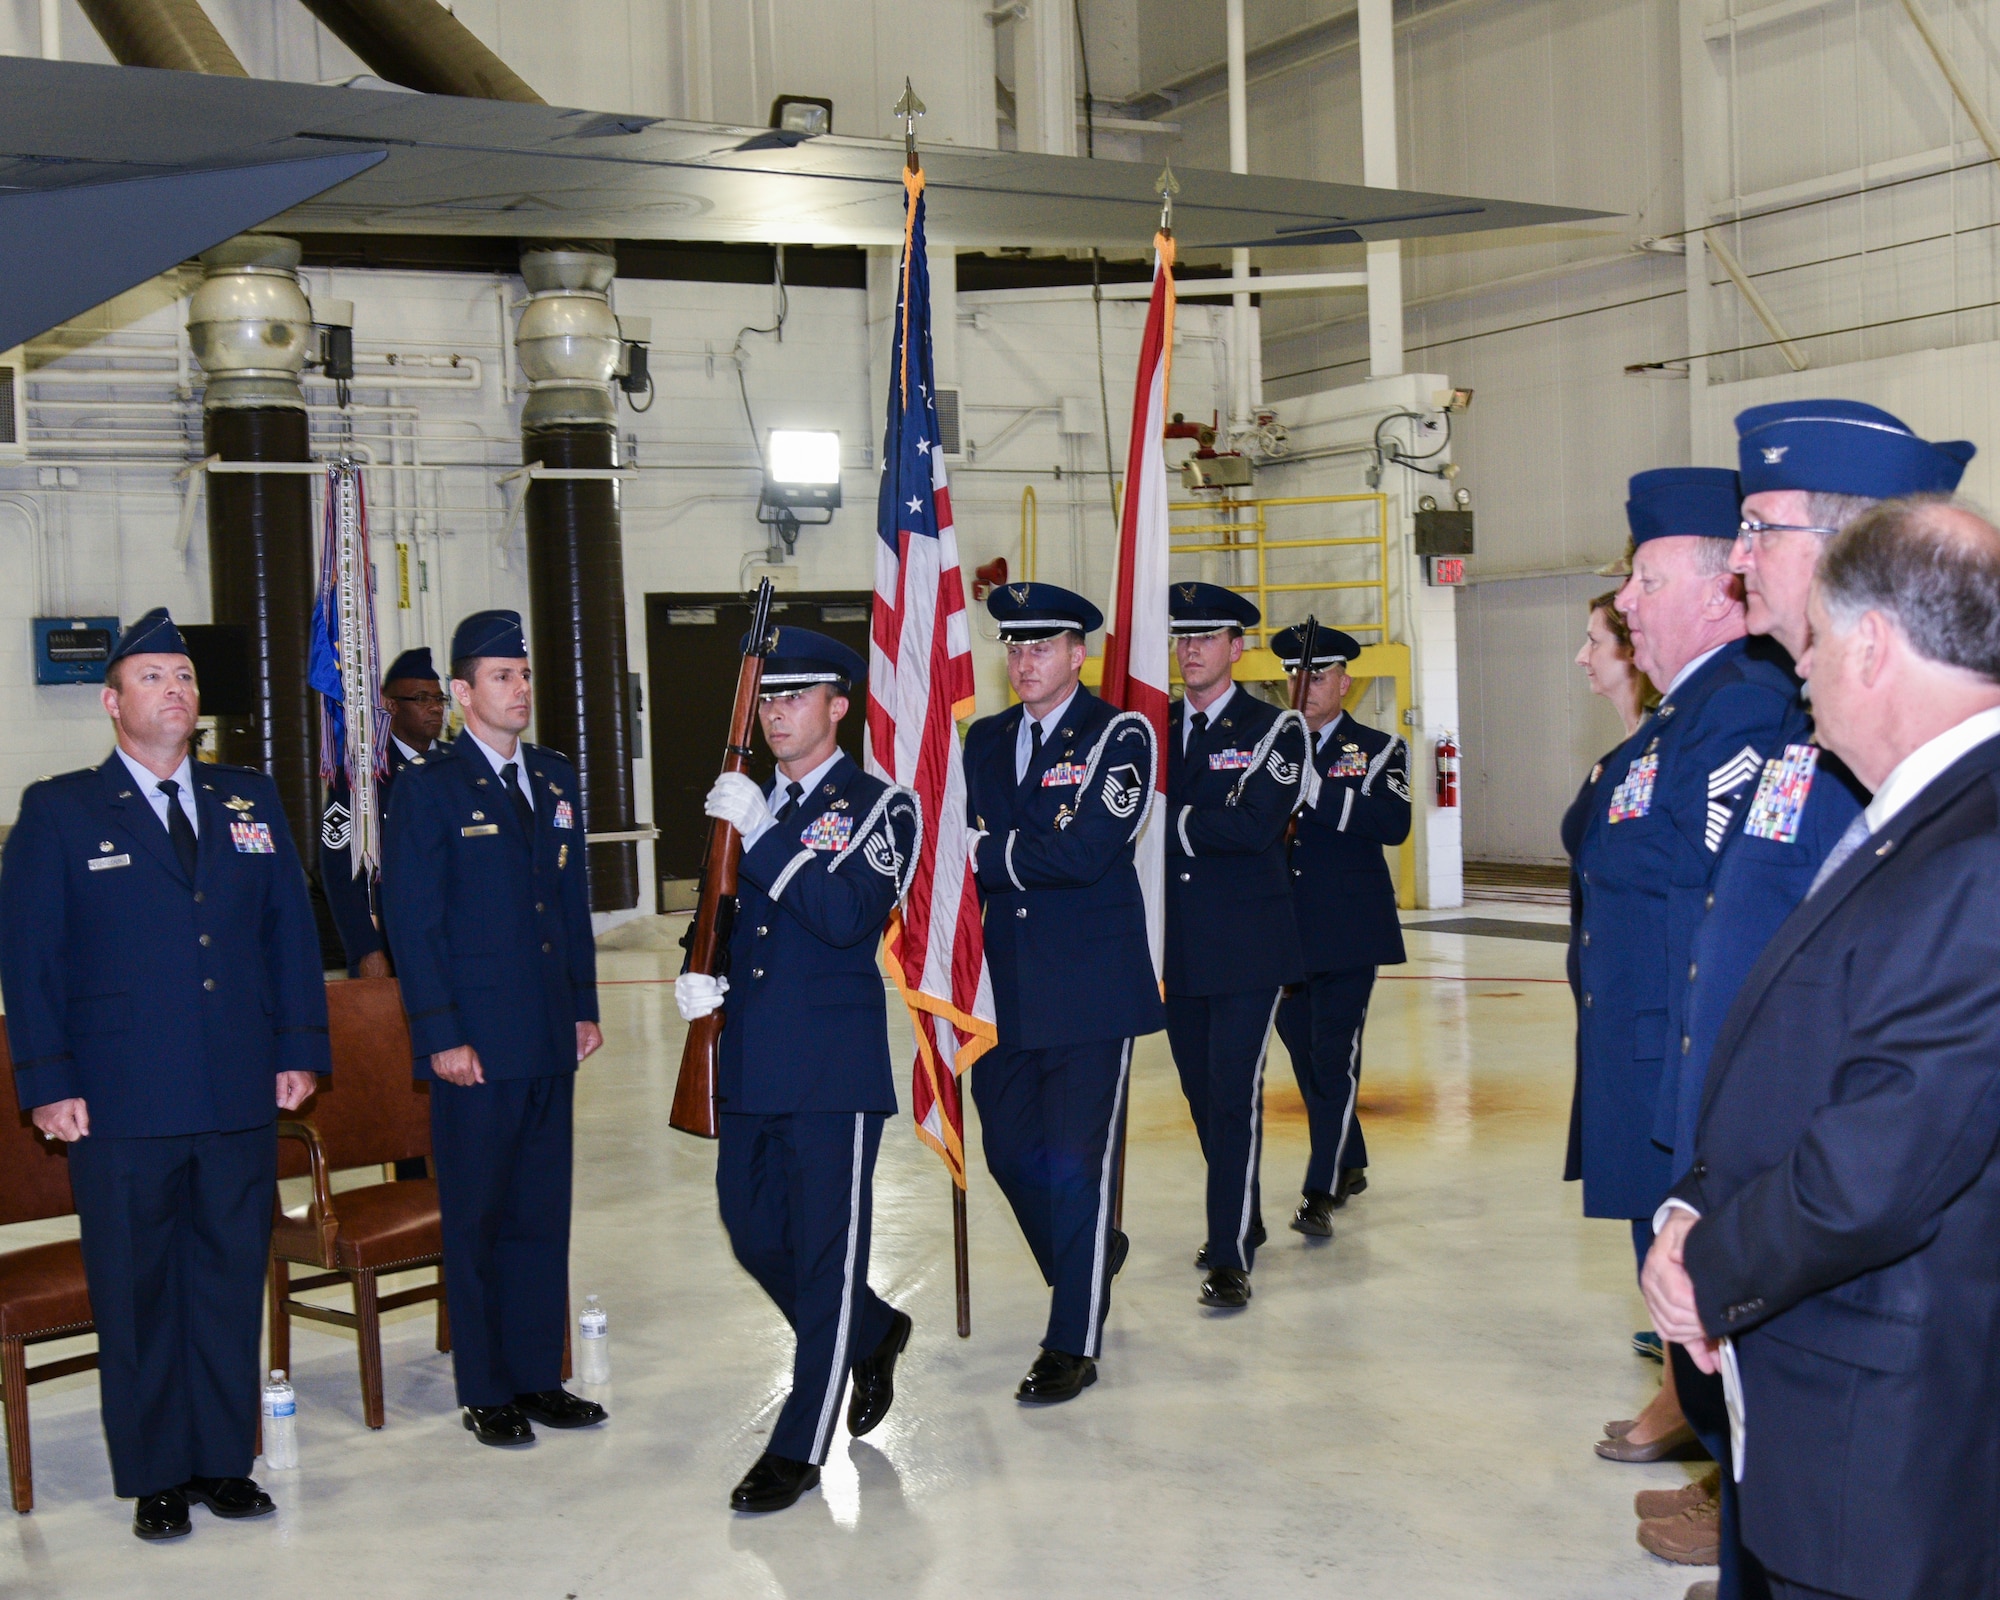 Honor Guard Post Colors During Change of Command Ceremony